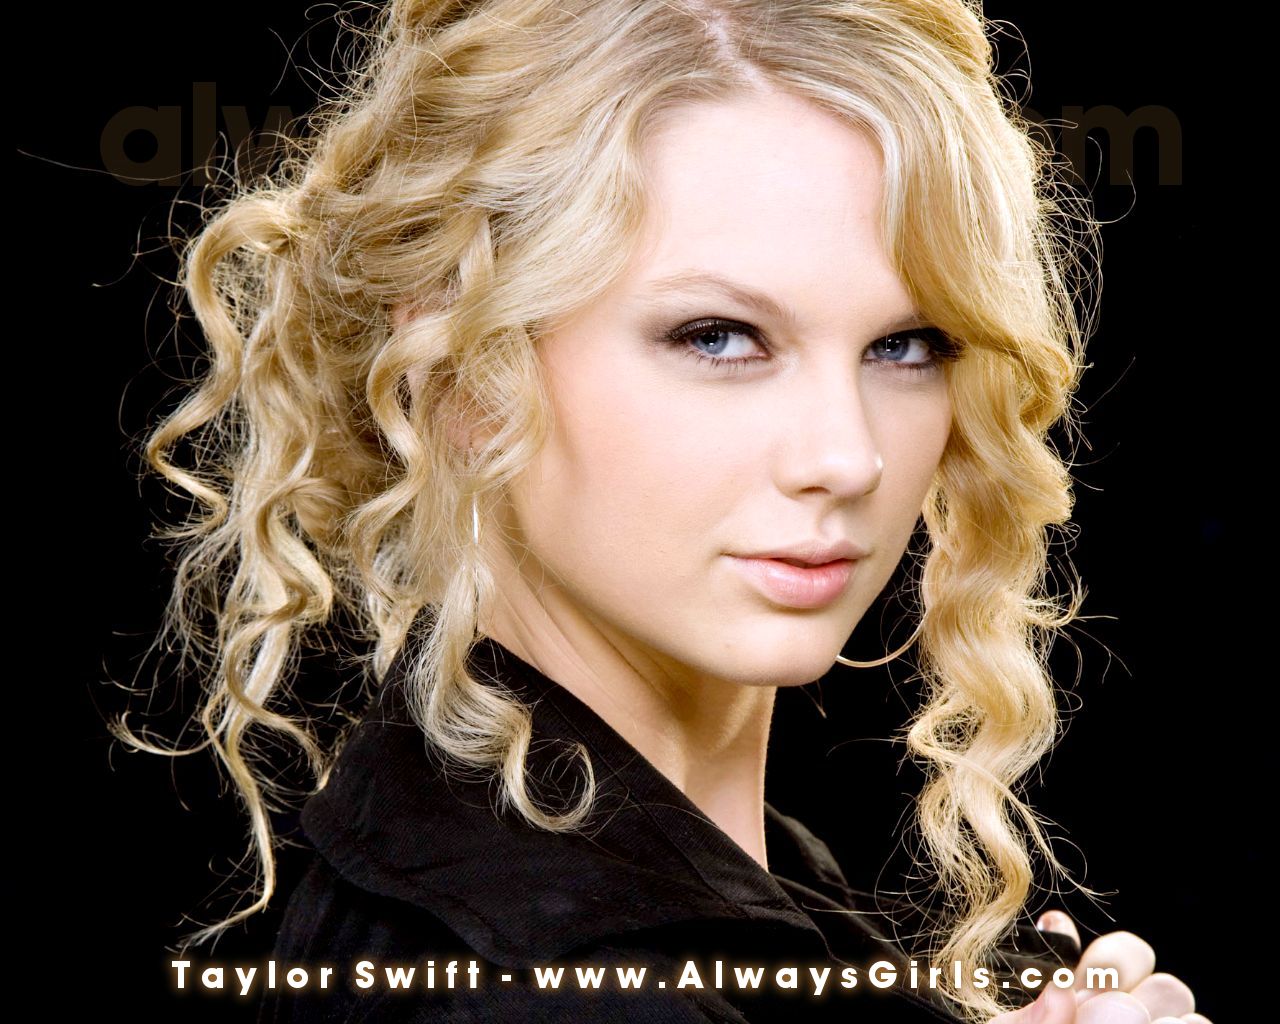 Taylor Swift,singer,pictures